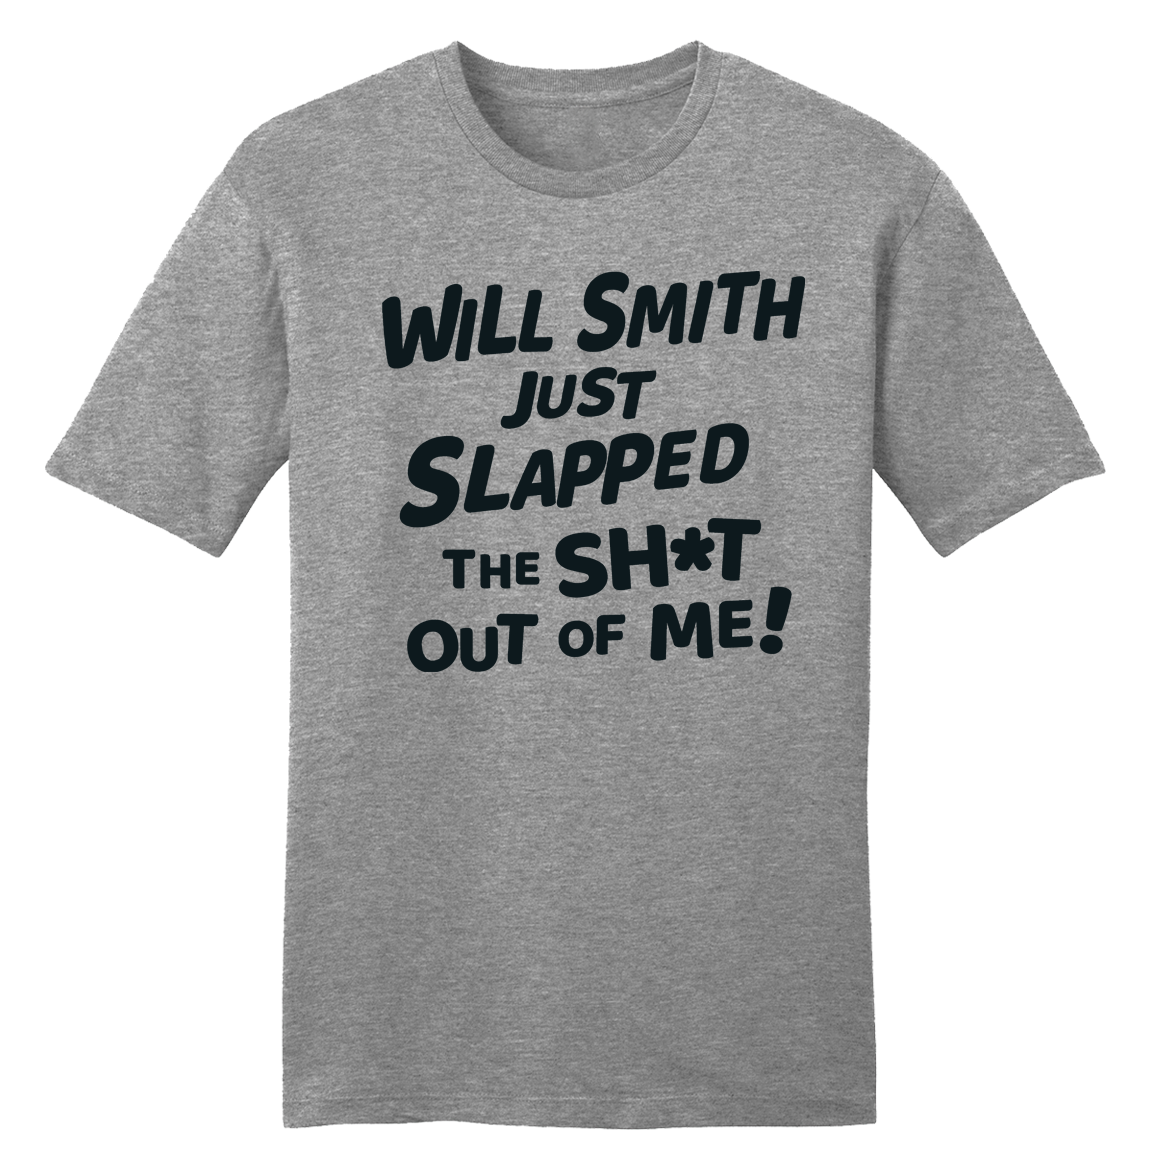 Will Smith Just Slapped Me (Censored) tee